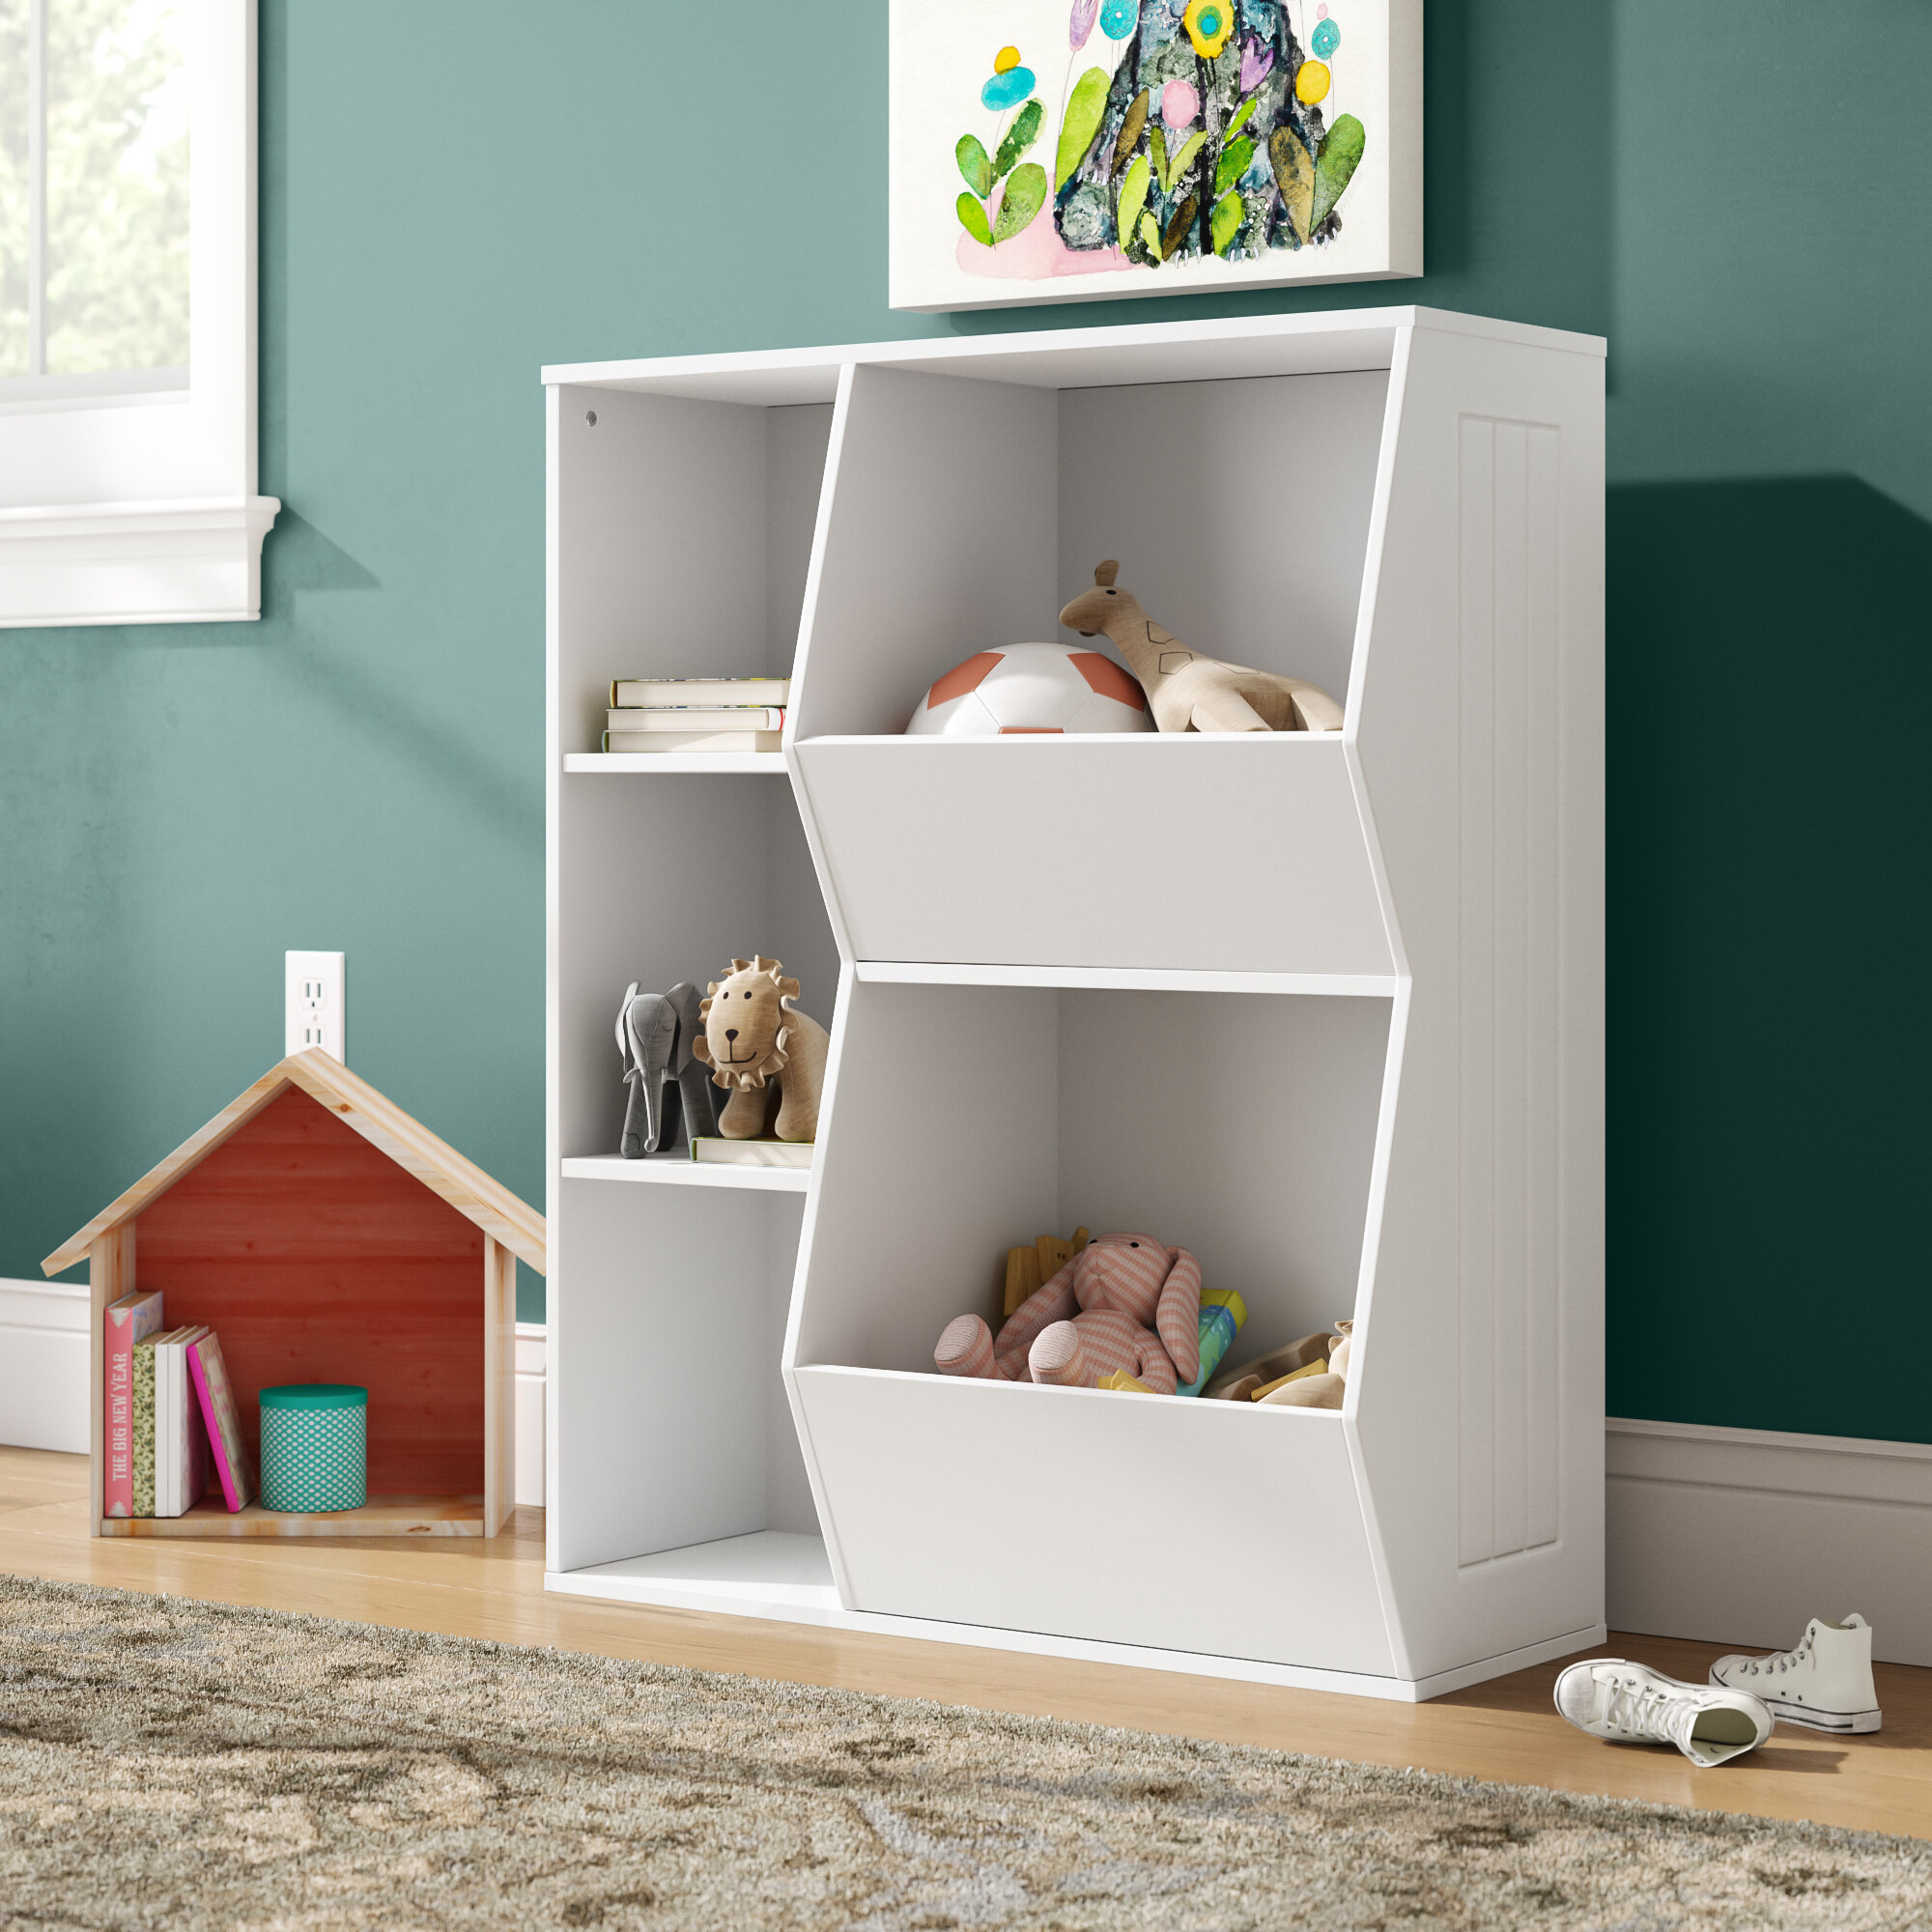 Standing Against The Wall with Drawer Dacorda Baby Kids Bookshelf 34 × 32inch Display Storage Shelves Picture Book Shelf Toys in Study Living Room Bedroom Childrens Magazine Rack White